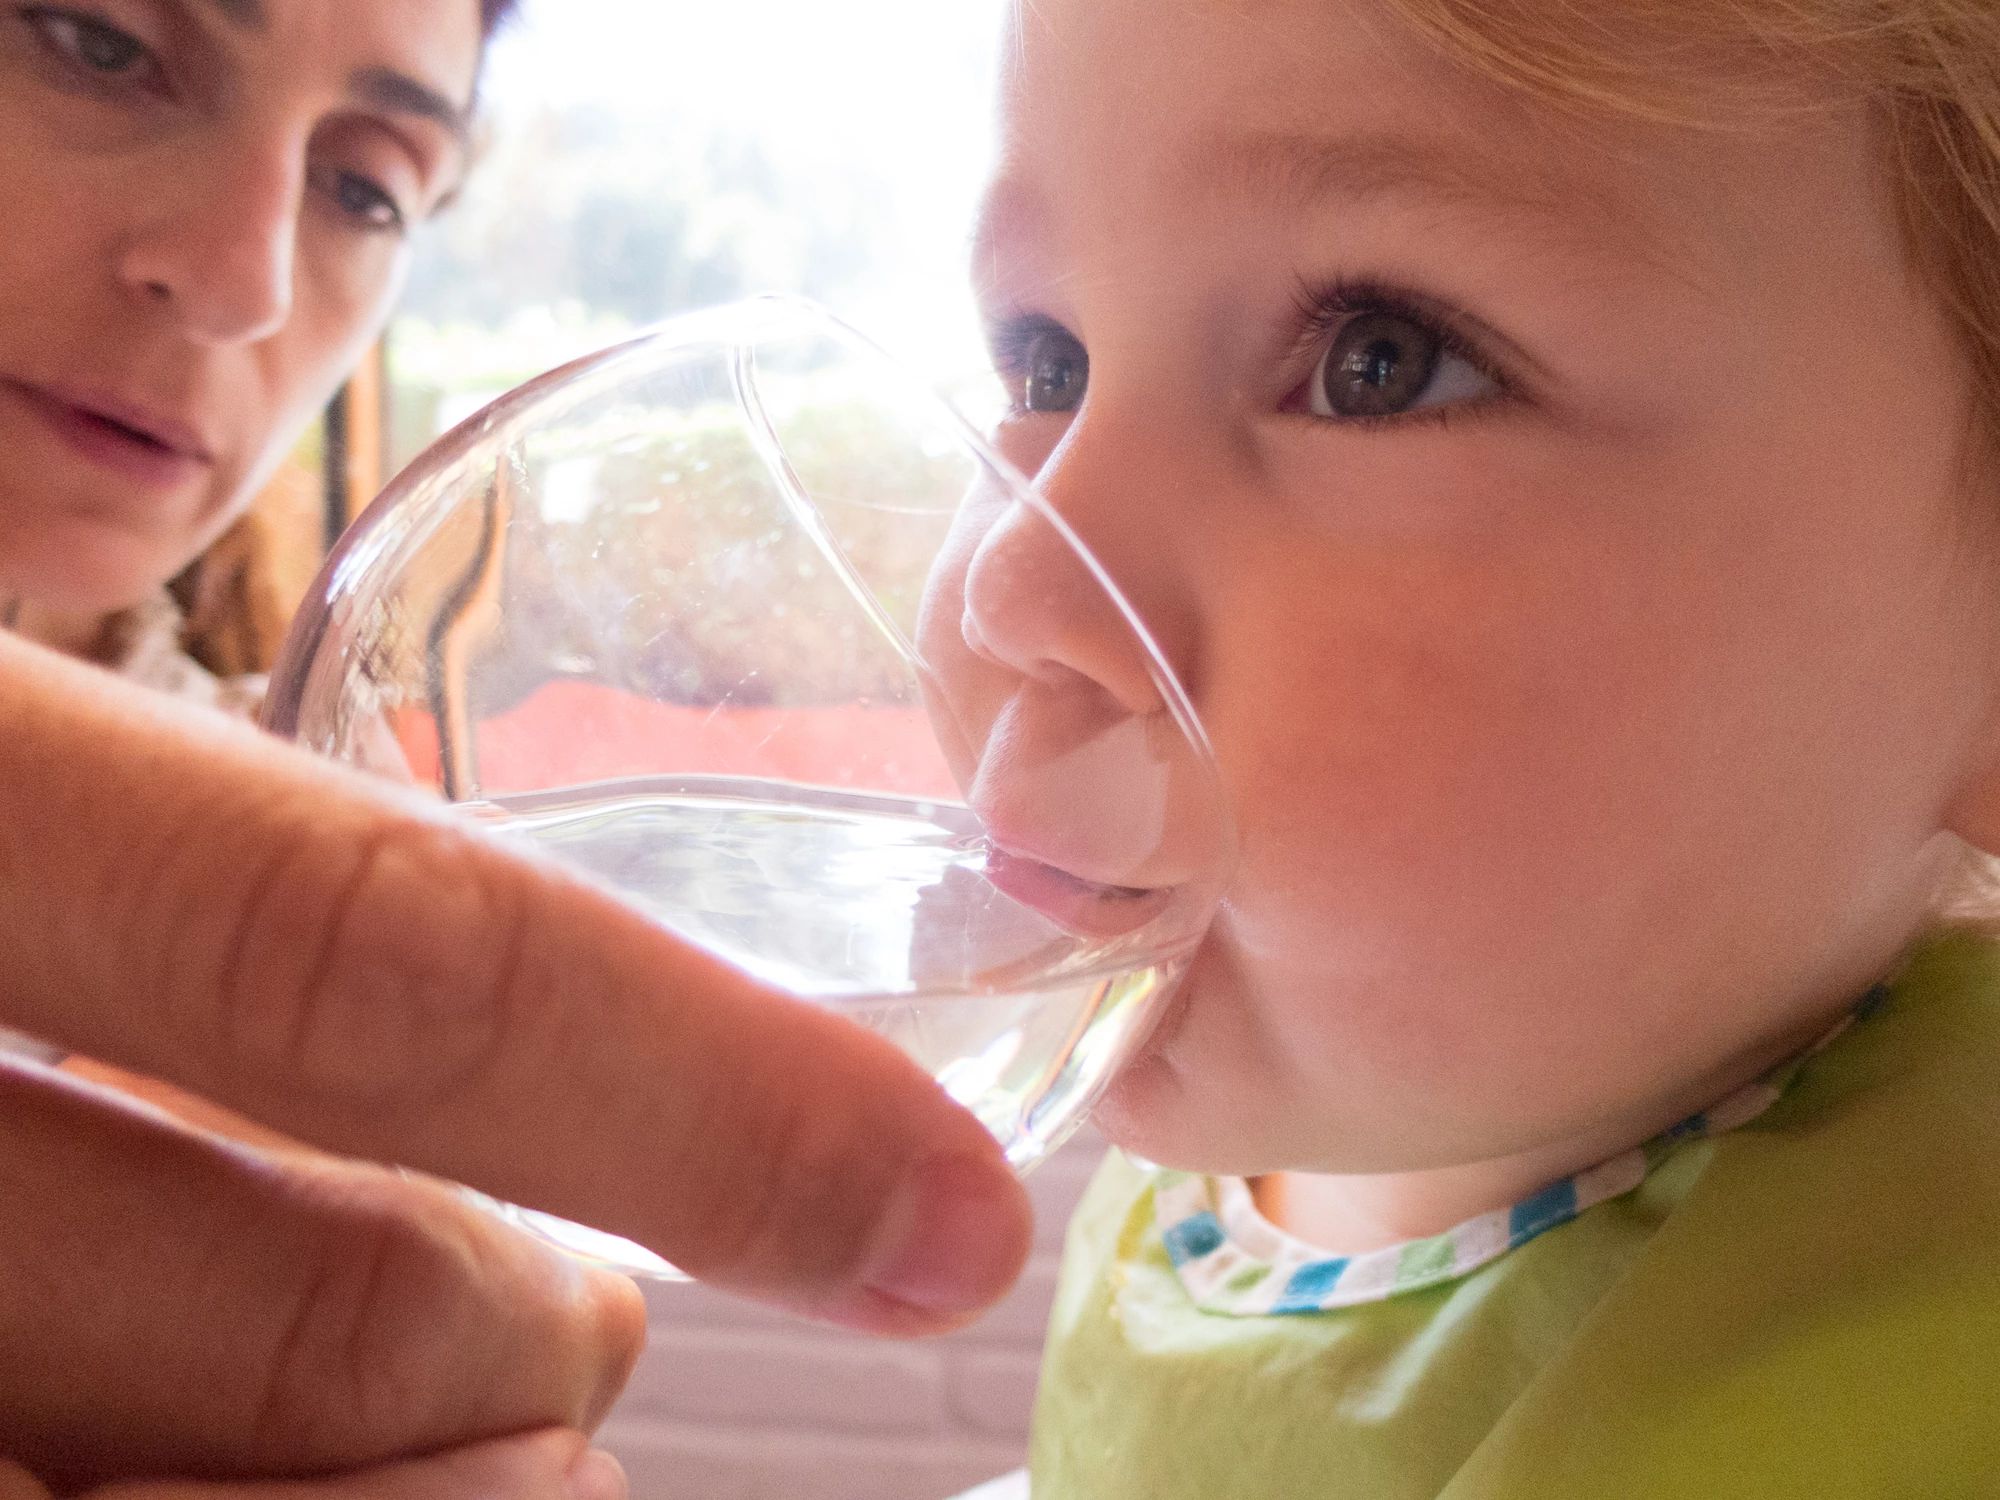 Baby drinking water from a cup